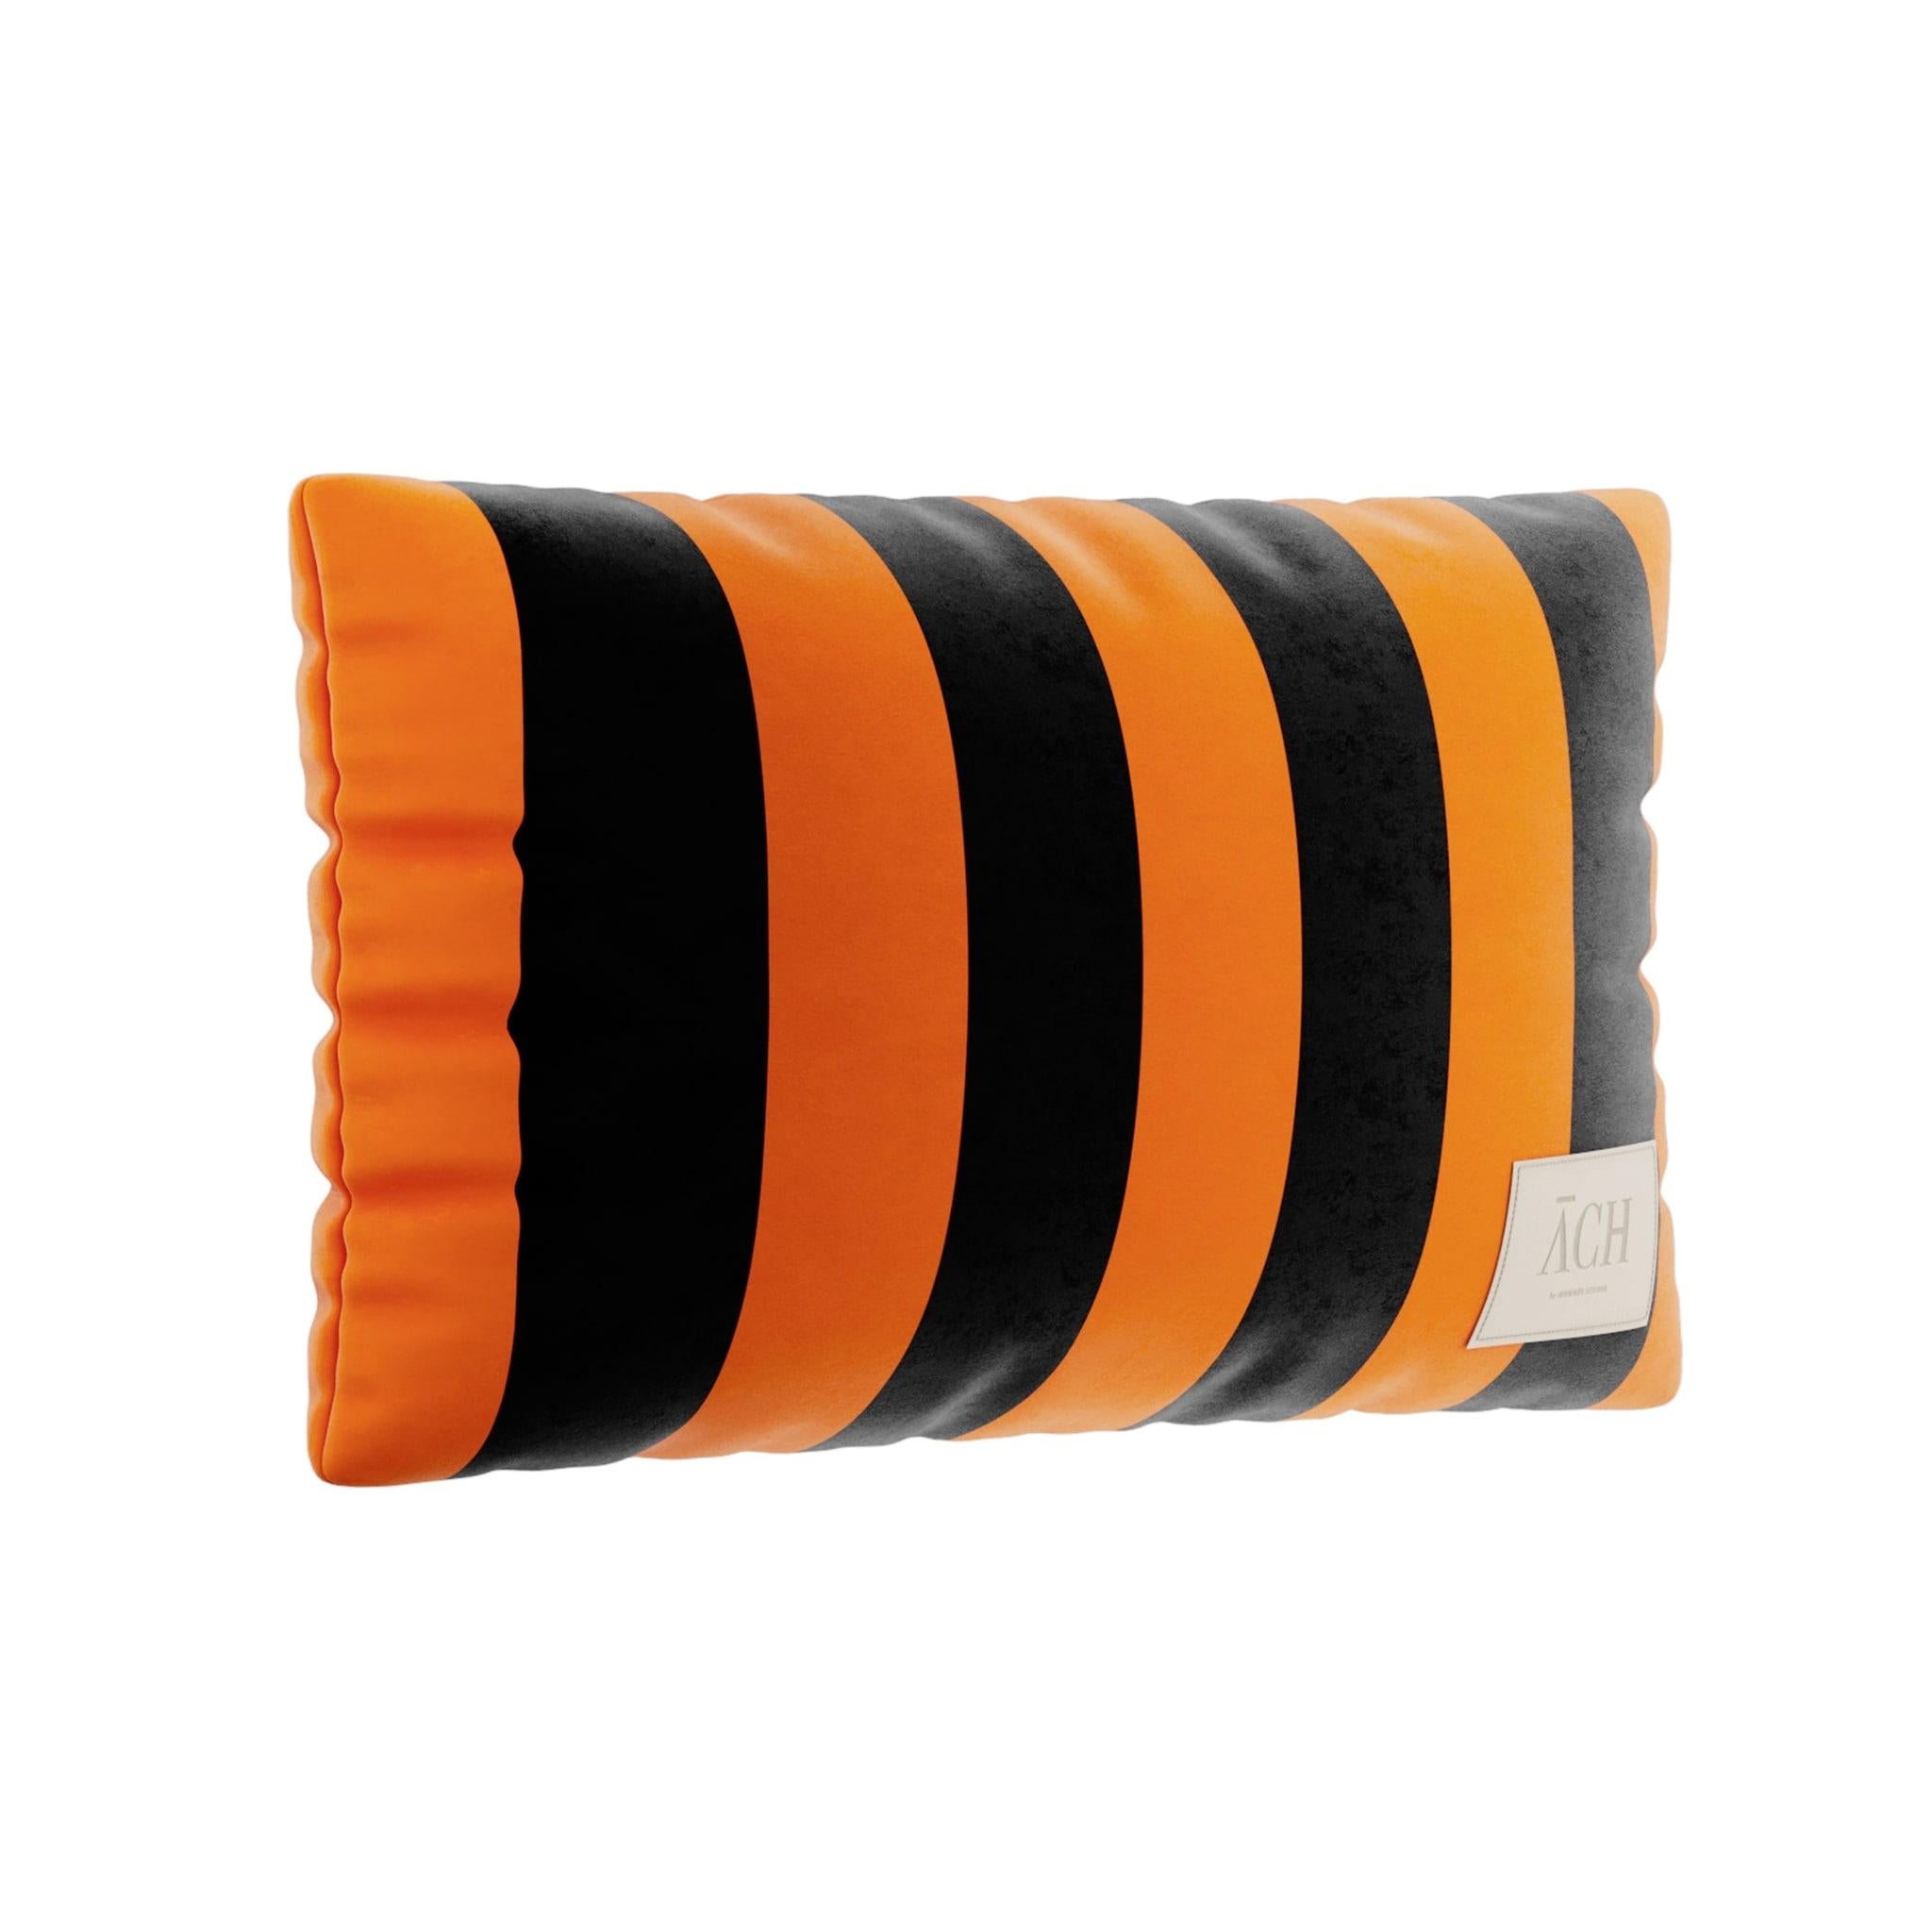 Black orange rectangle pillow is a modern velvet cushion with a statement color combination for a contemporary living room. The velvet pillow is an eye-catching home accessory for an instant design upgrade. The rectangular stripes collection is a